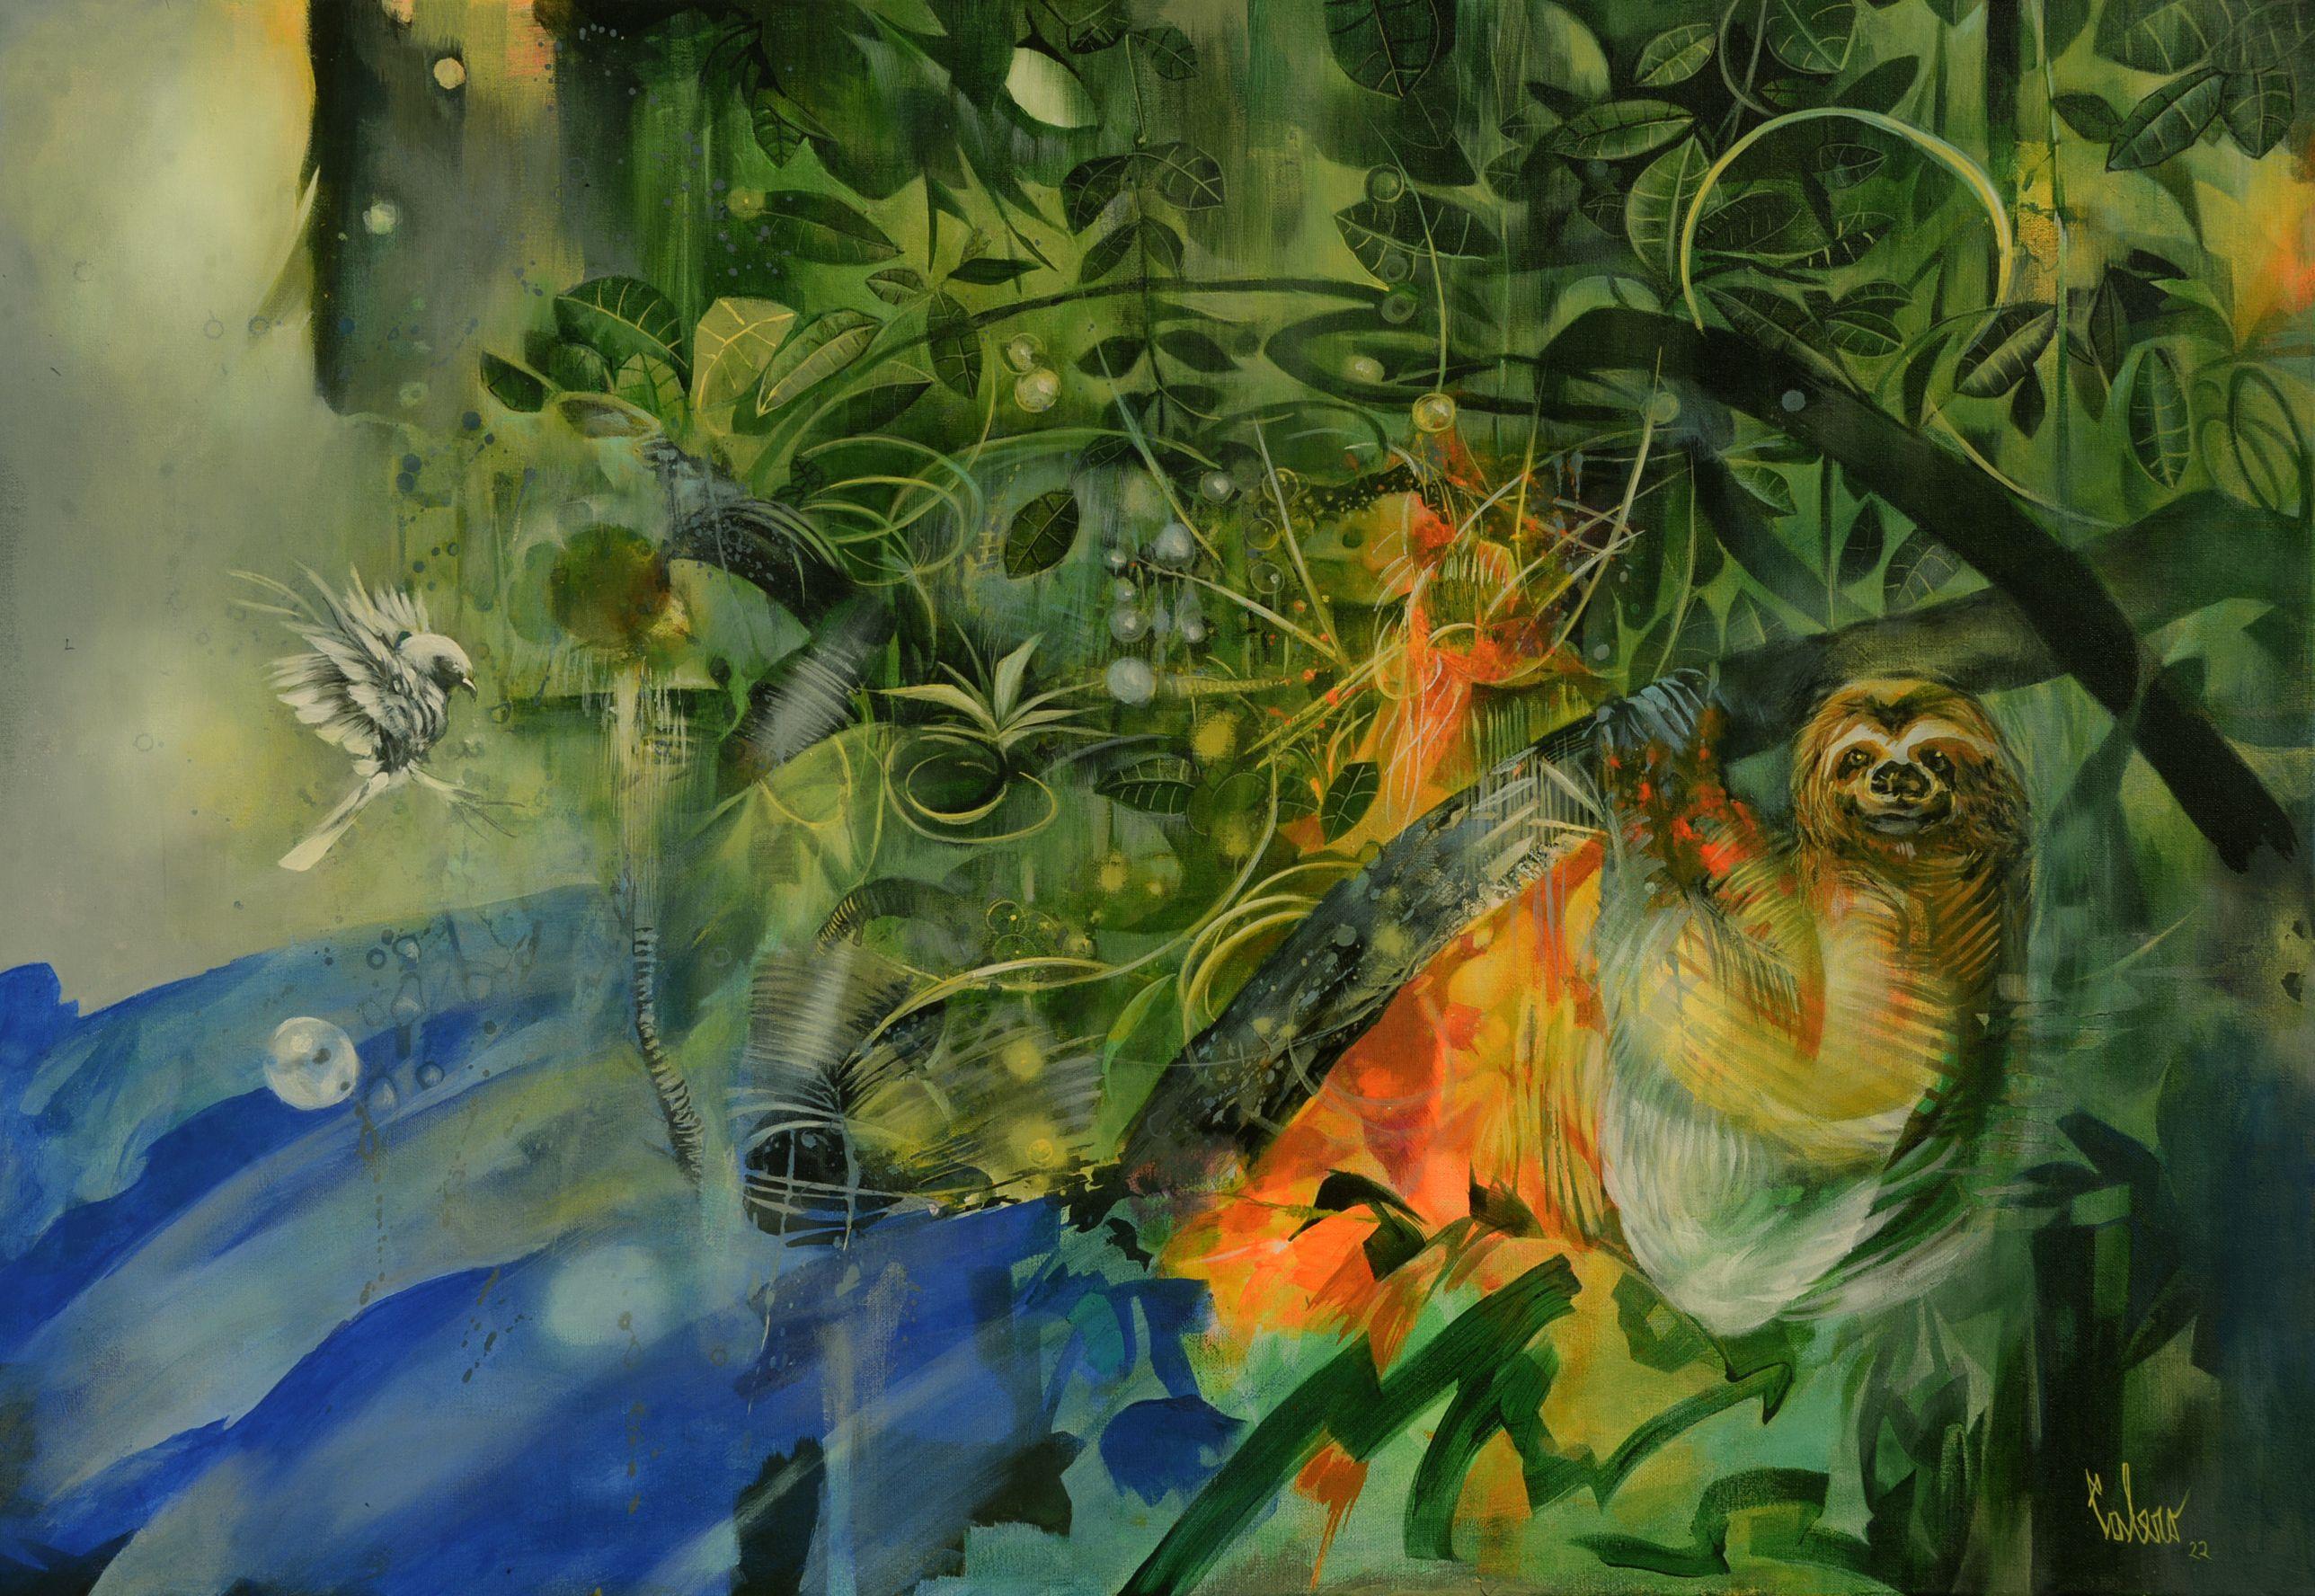 Jorge CaleroÂ´s depiction of the wildlife aims to bring back the feeling of awe and love towards nature by enhancing chromatically and formally the feeling of fantasy it creates in us as we reached the point of exhaustion in terms of ecological